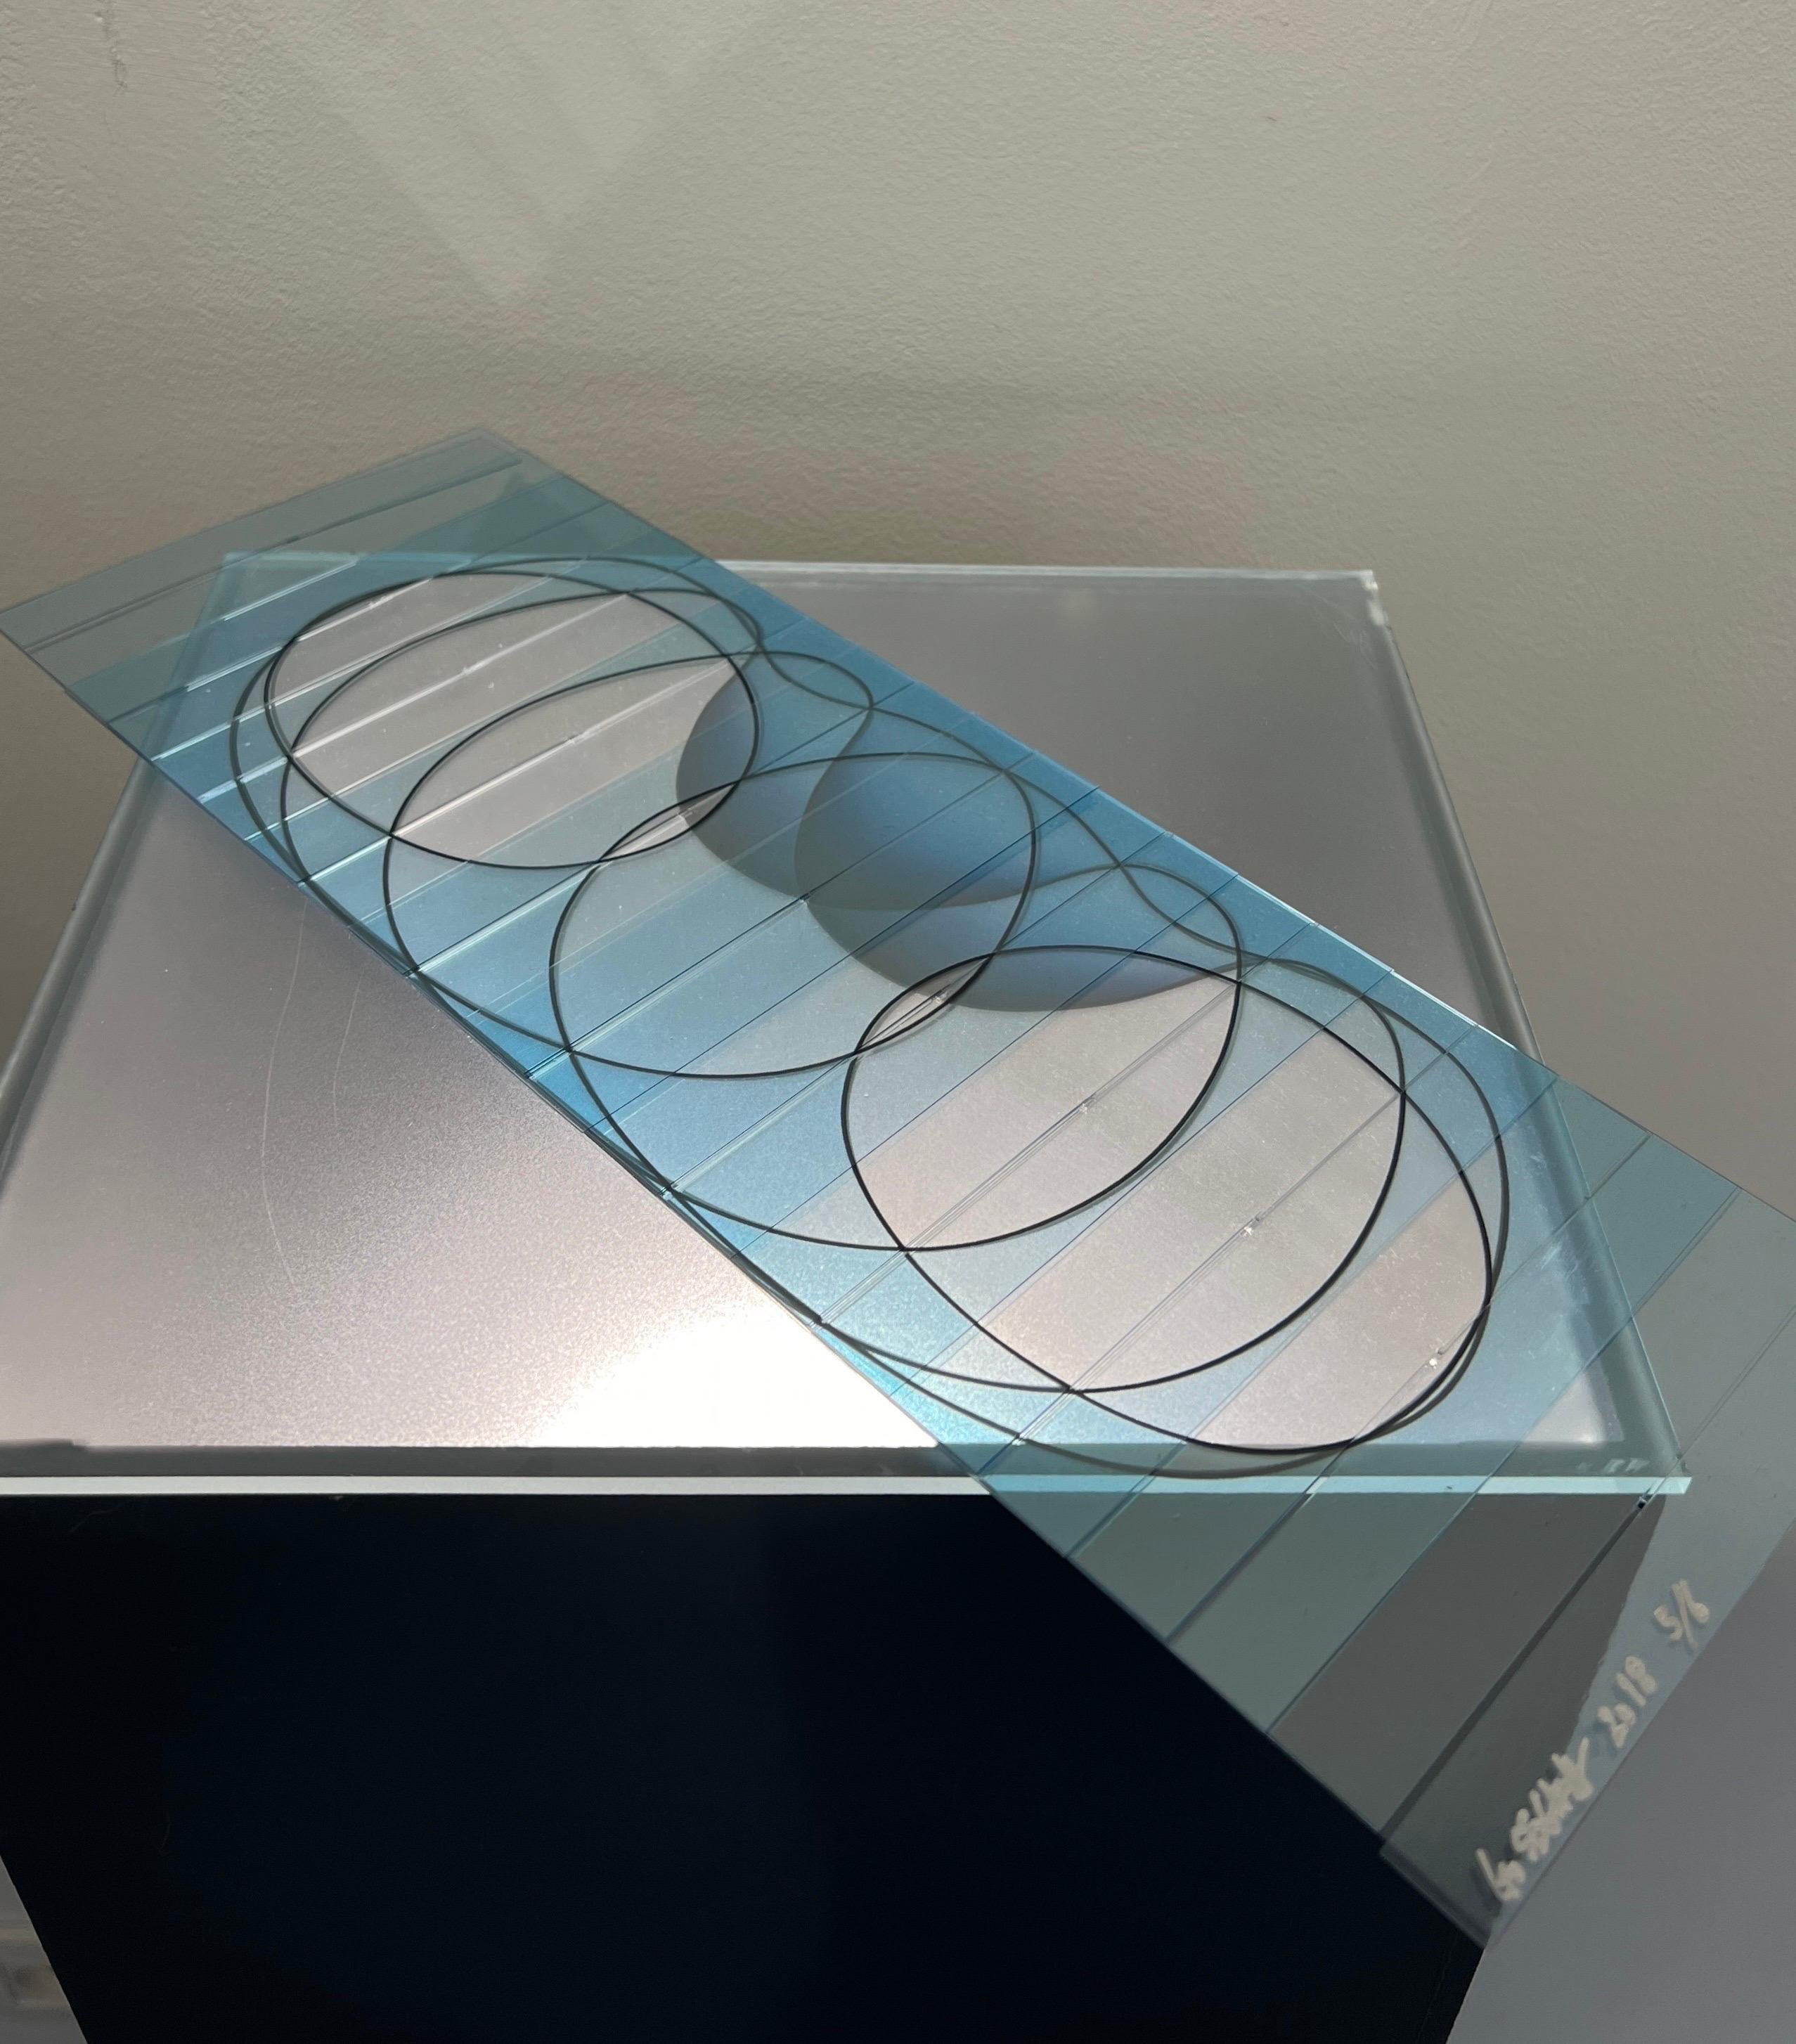 Origami/kinetic artpiece, folds completely flat. Provides a fun and strong visual illusion , with a feeling of jelly.
Signed and numbered 5/6, dated 2018.
Led pedestal comes extra. It is optional, but recommended (looks wonderful in darkness). It